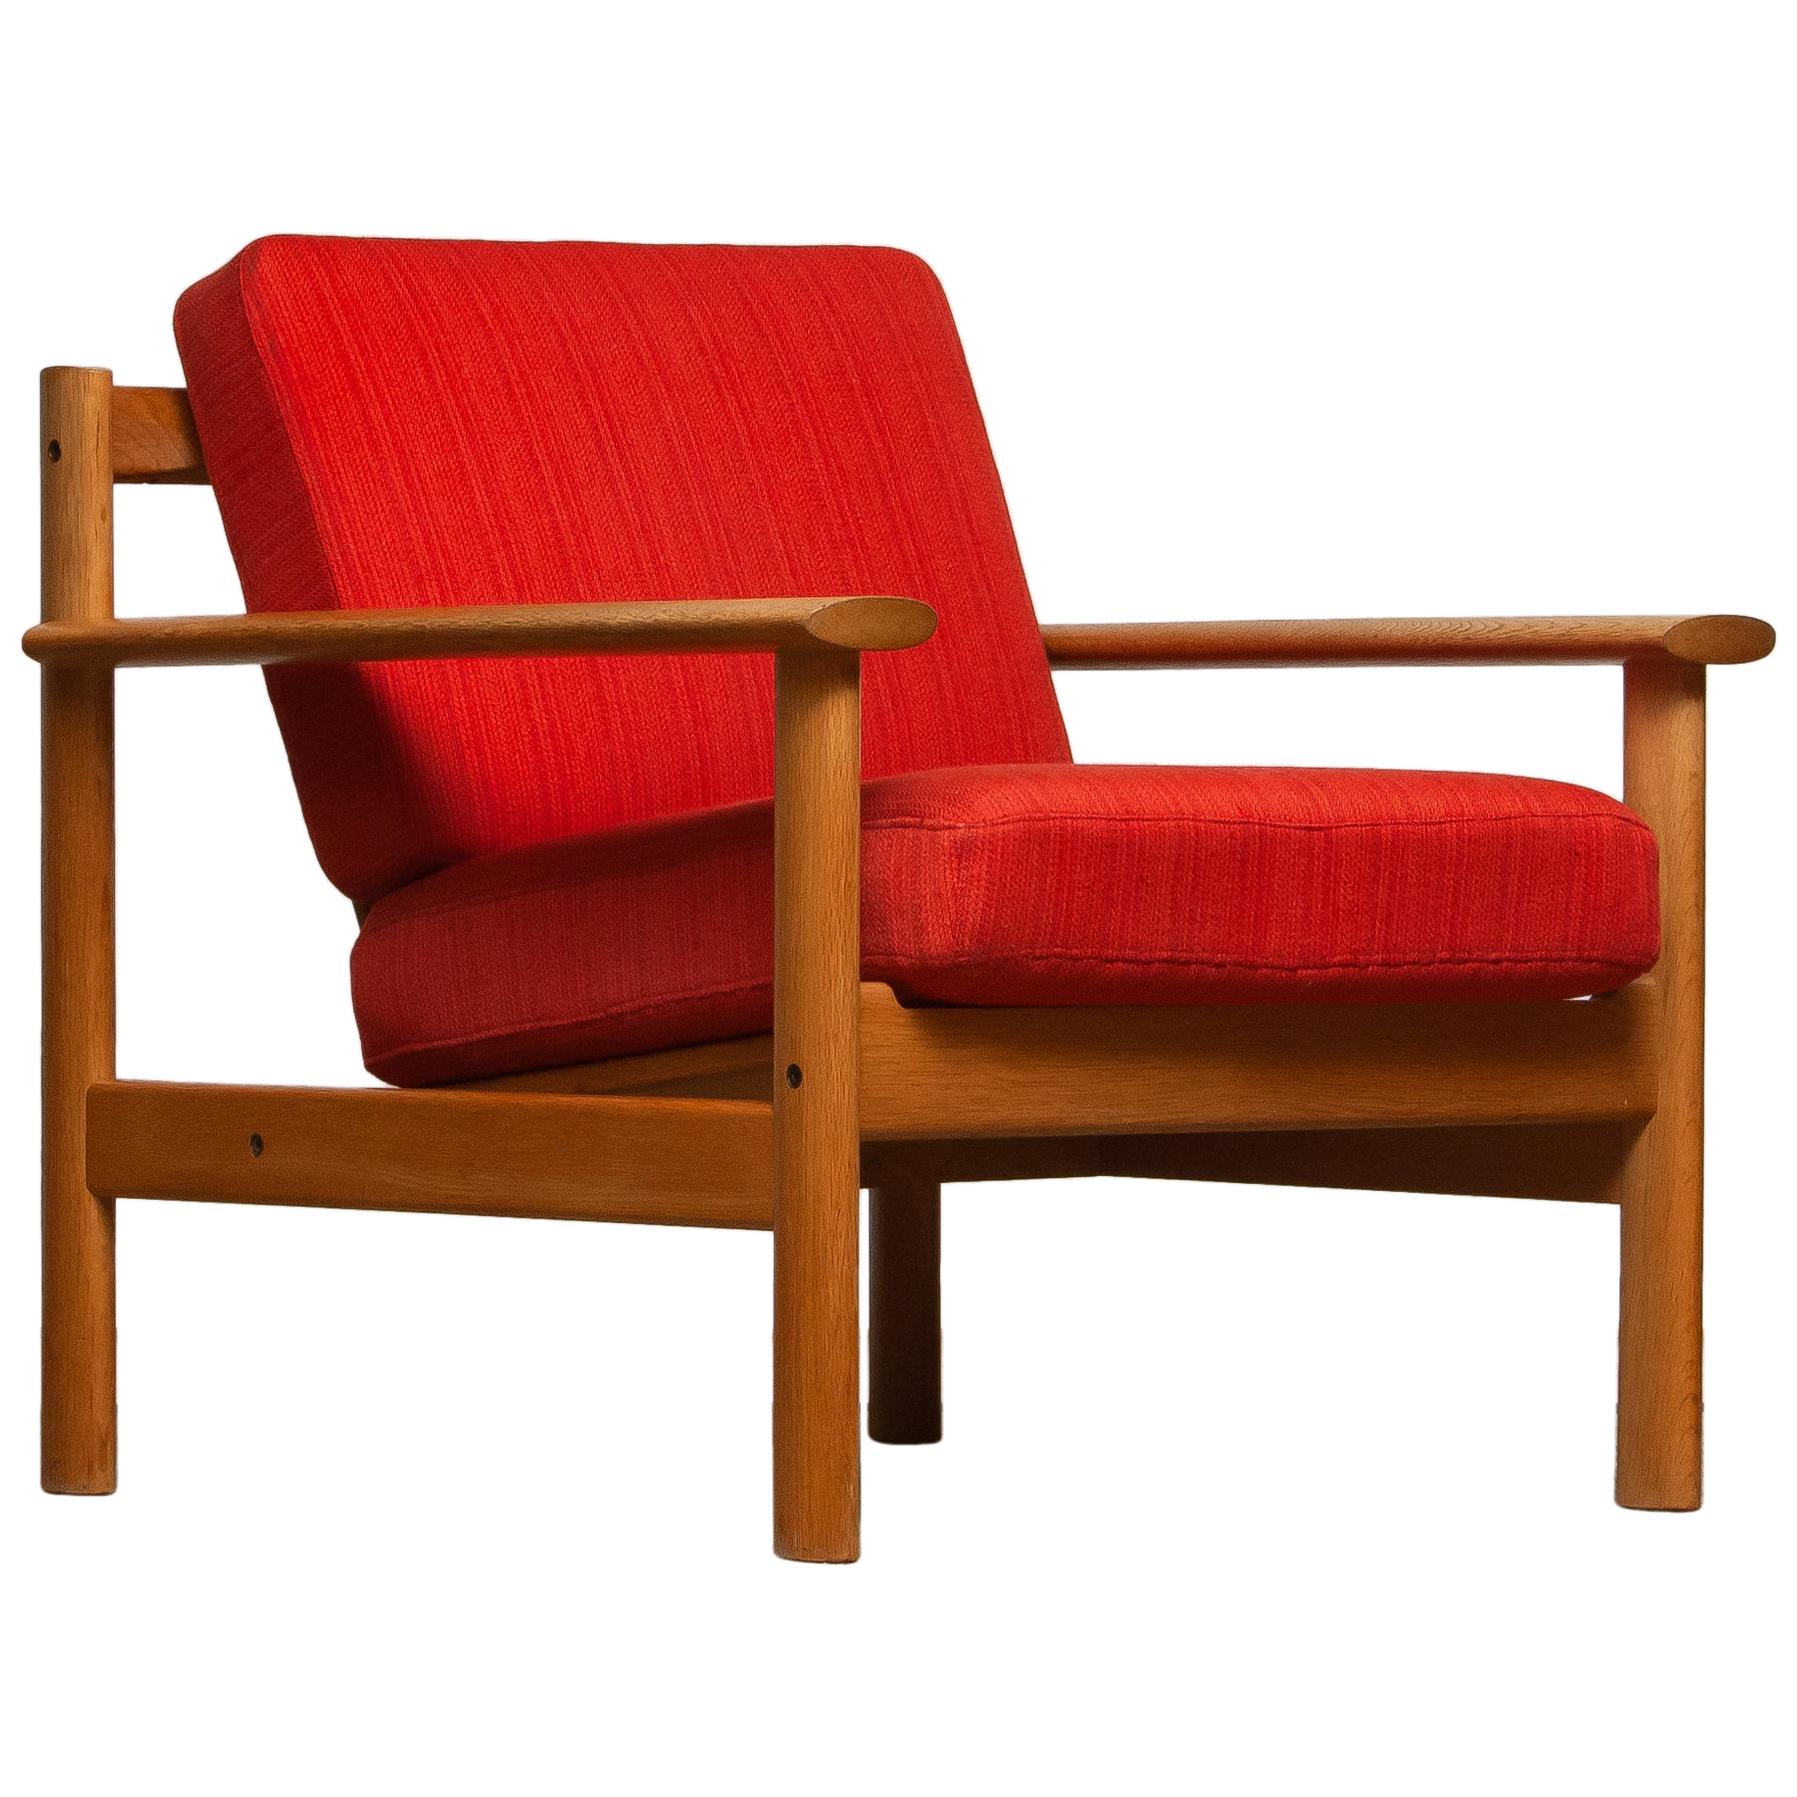 Firm Danish oak lounge easy chair in the manner of Poul Volther from the 1960s.
The cushions va a metal base with spring and still upholstered with the original fabric.
Overall condition is good.
Note that we have two similar chairs. See the last